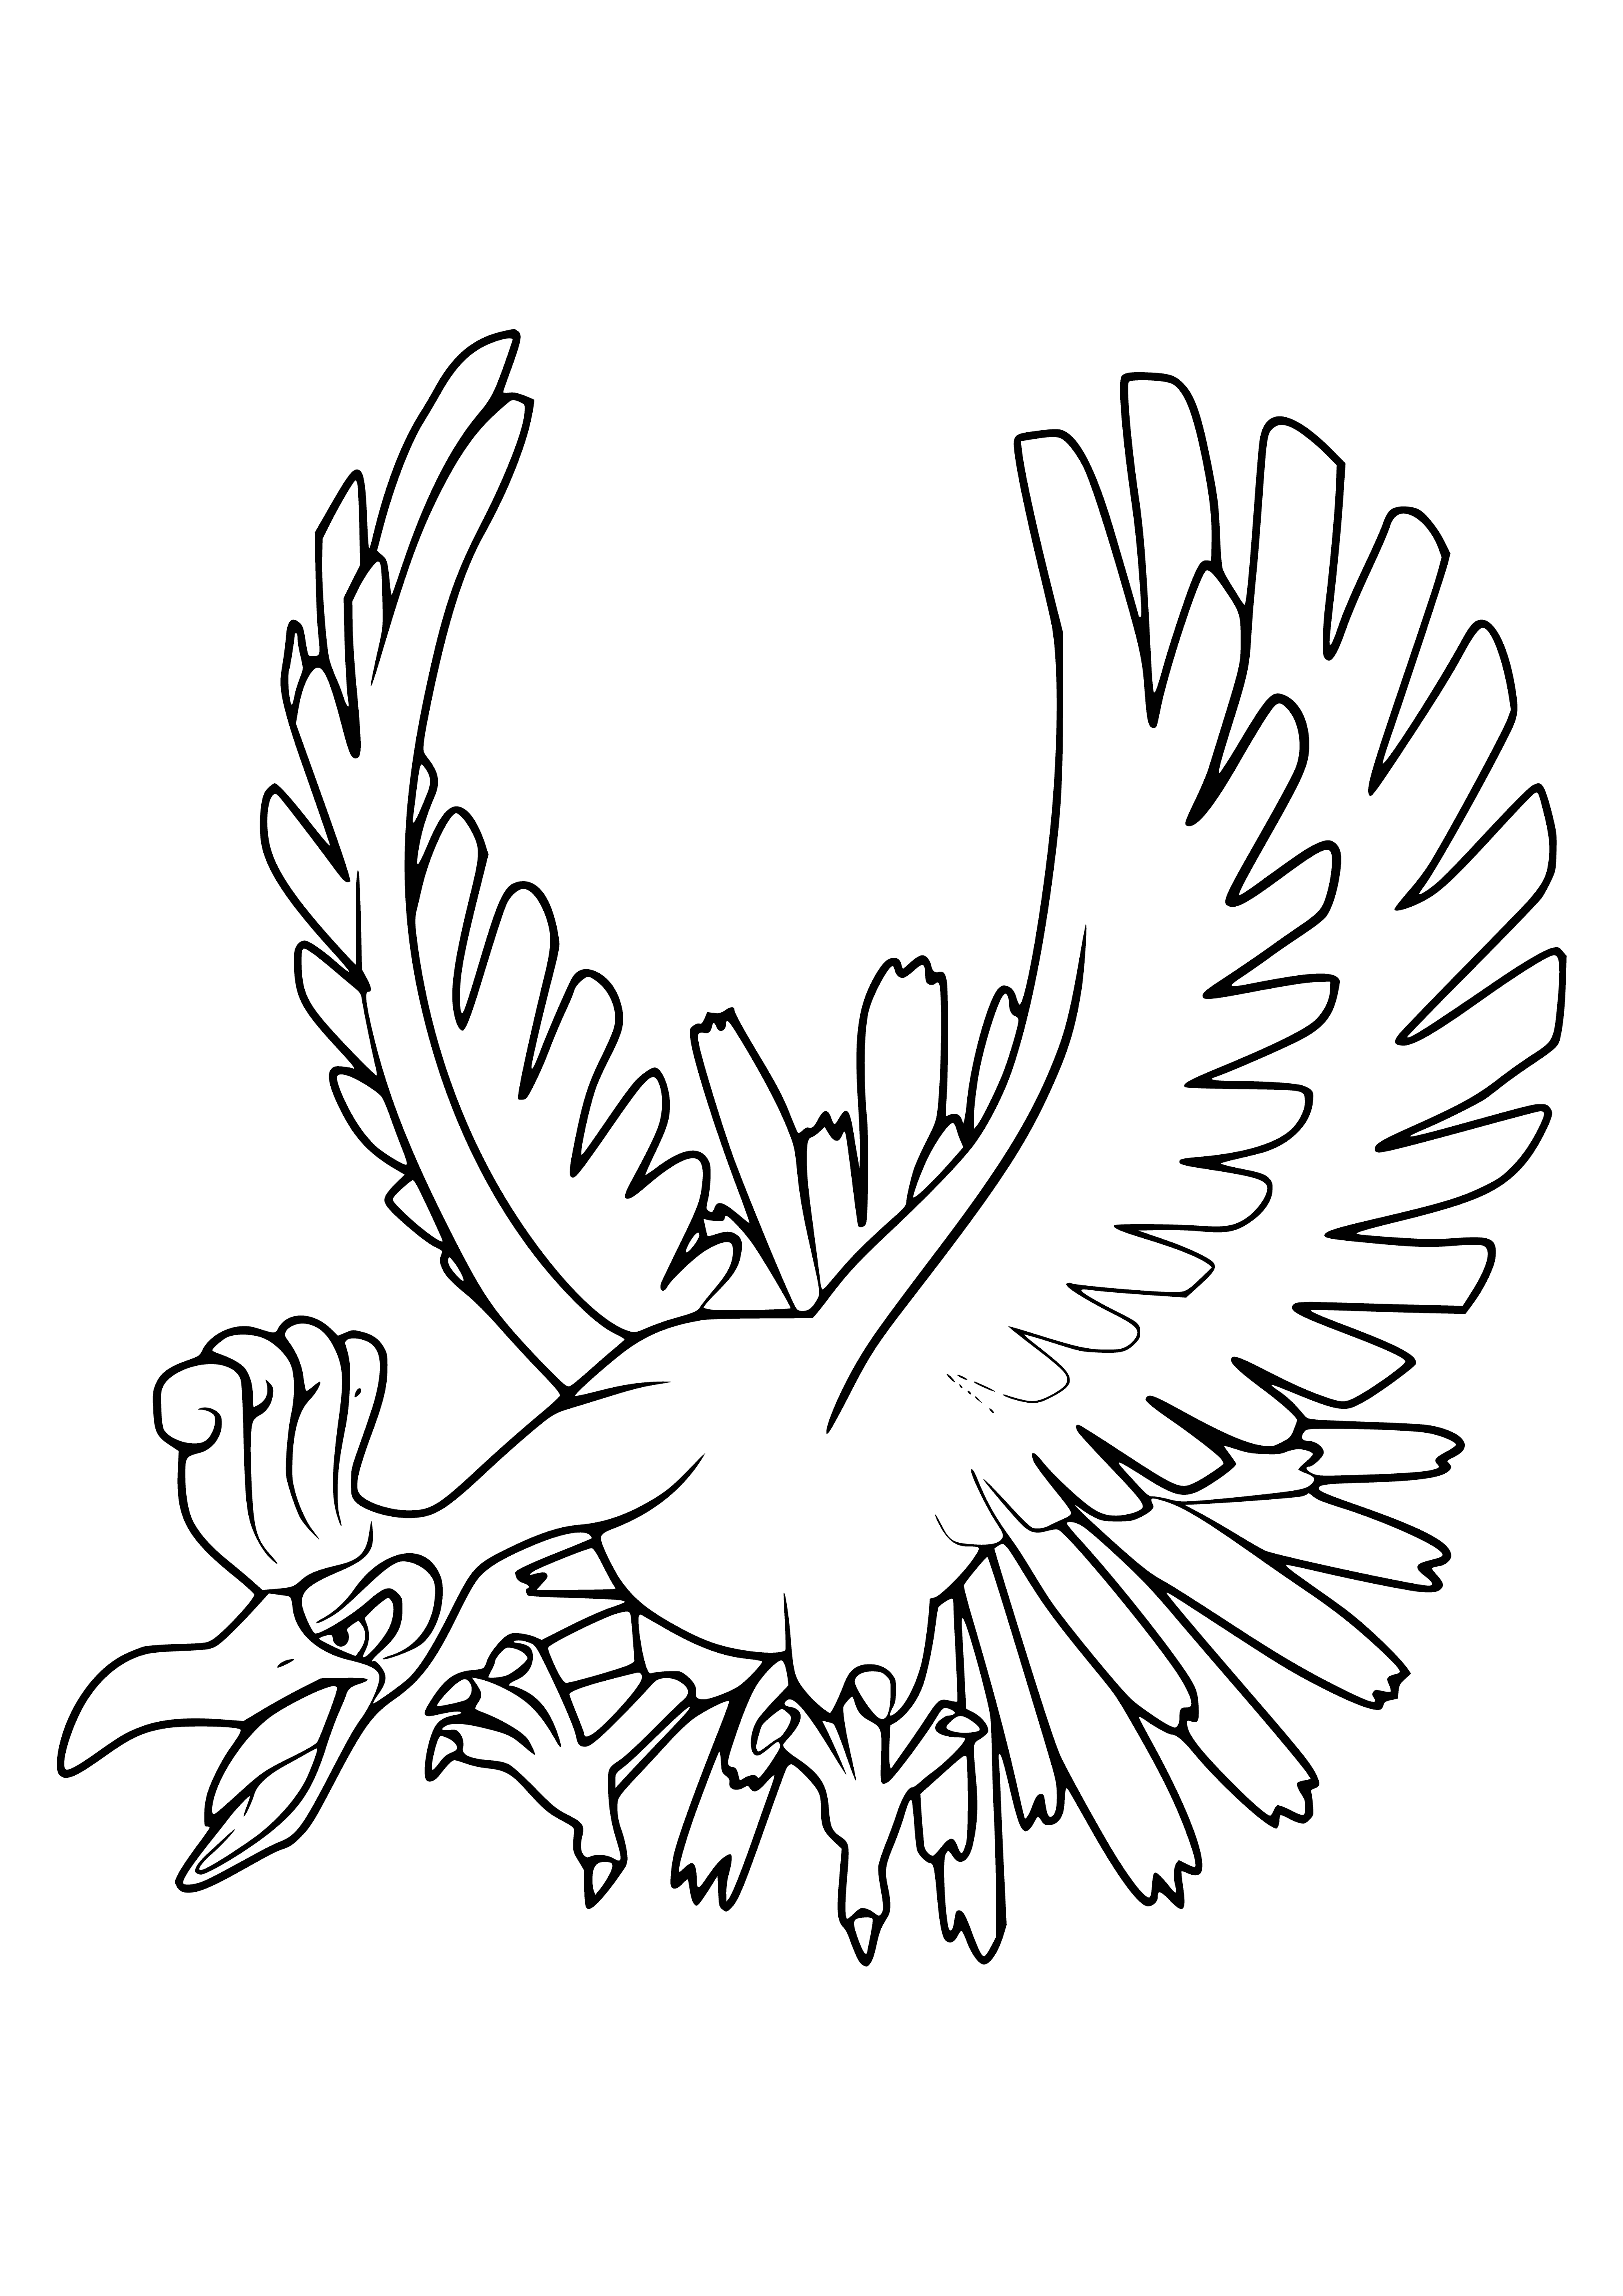 Legendary Pokemon Ho-Oh (Ho-Oh) coloring page